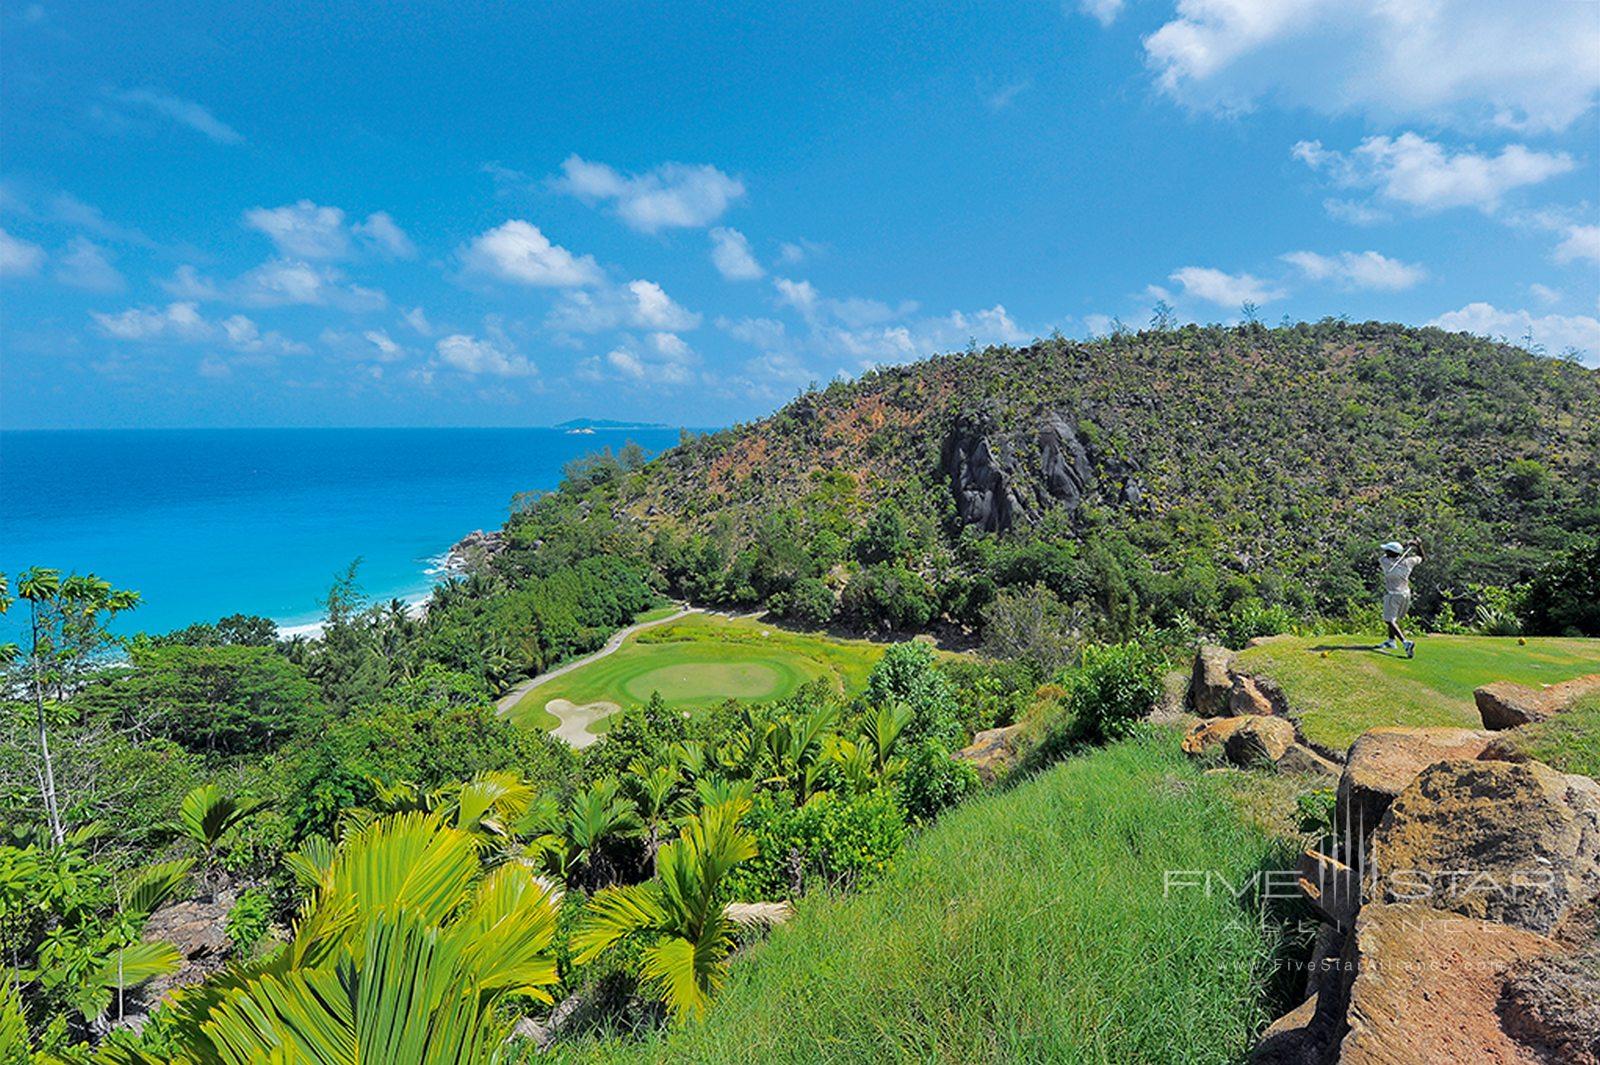 The Constance Lemuria in the Seychelles has an amazing championship 18-hole golf course designed by Rodney Wright and Marc Farry. The 6 105 yardpar 70 course was built along the coastline of the Indian Ocean and through tropical woodlands.